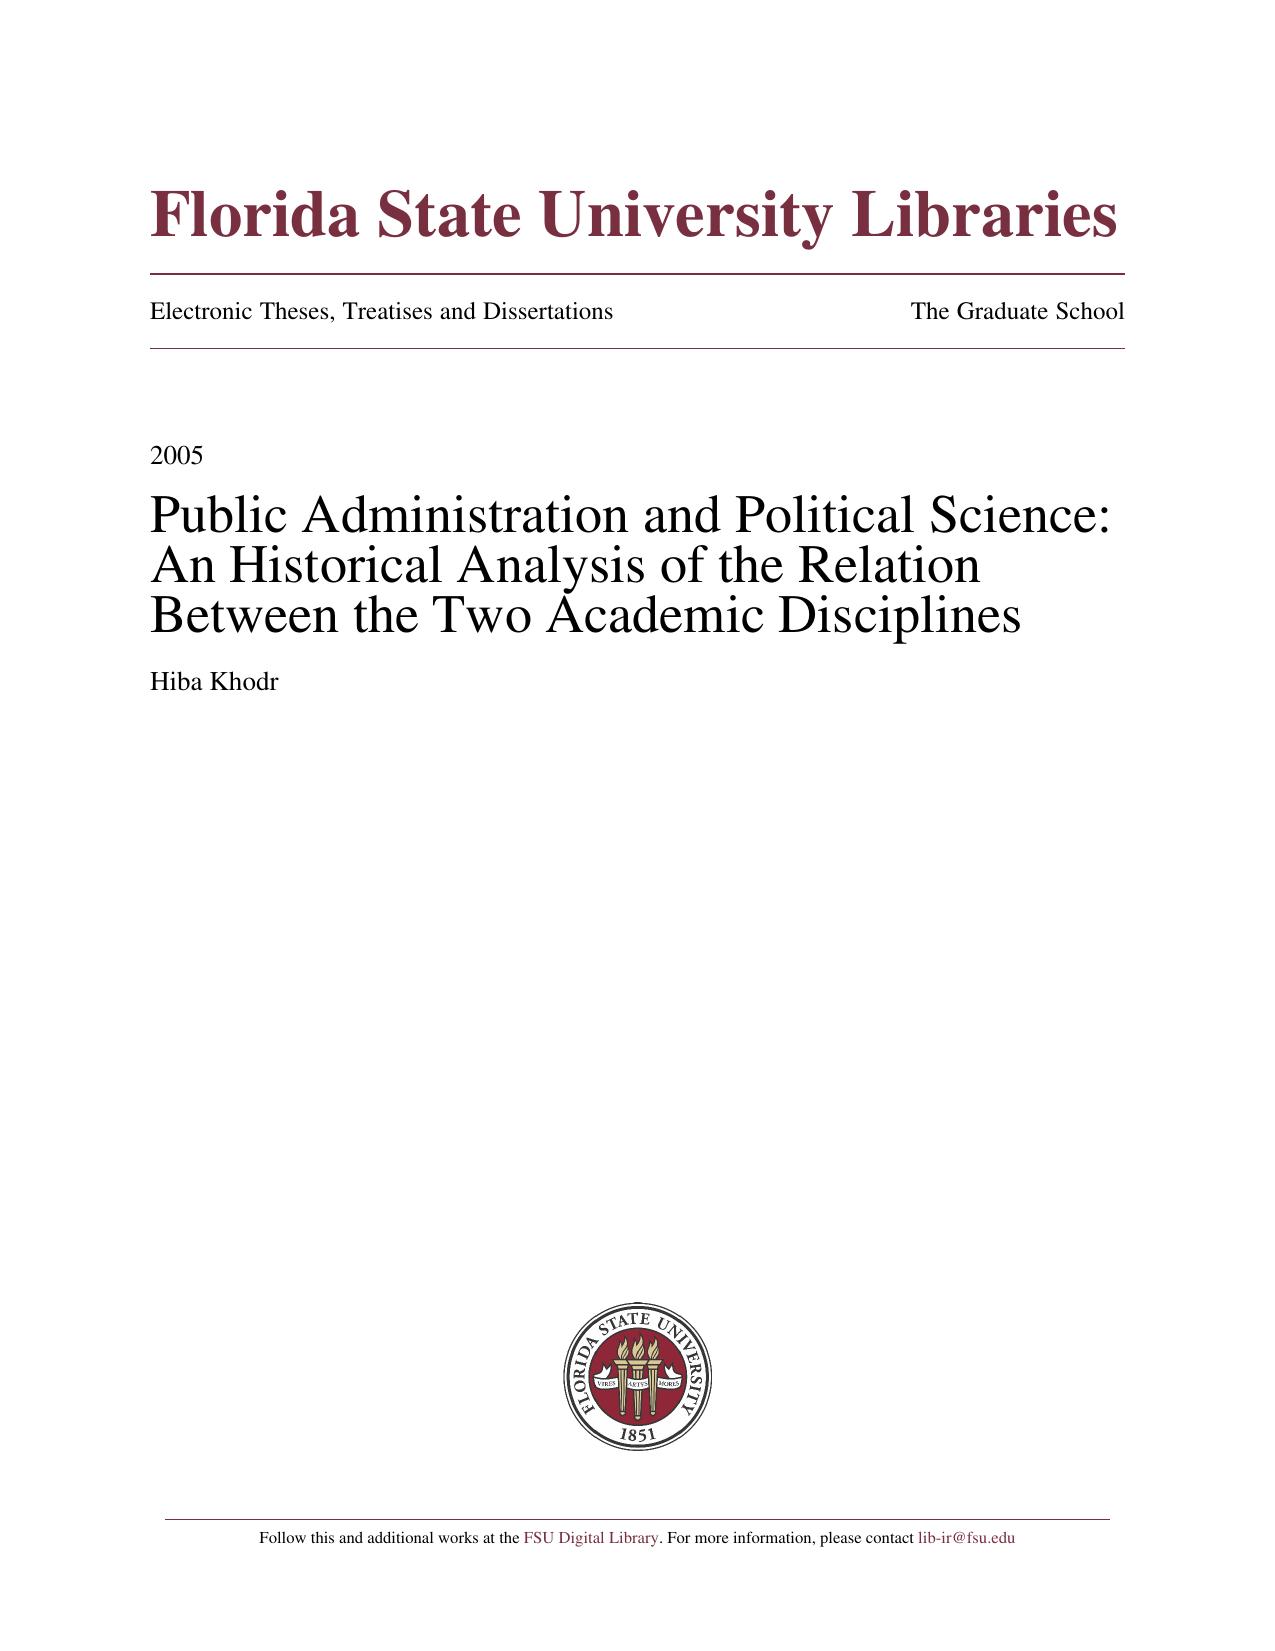 Public Administration and Political Science: An Historical Analysis of the Relation Between the Two Disciplines